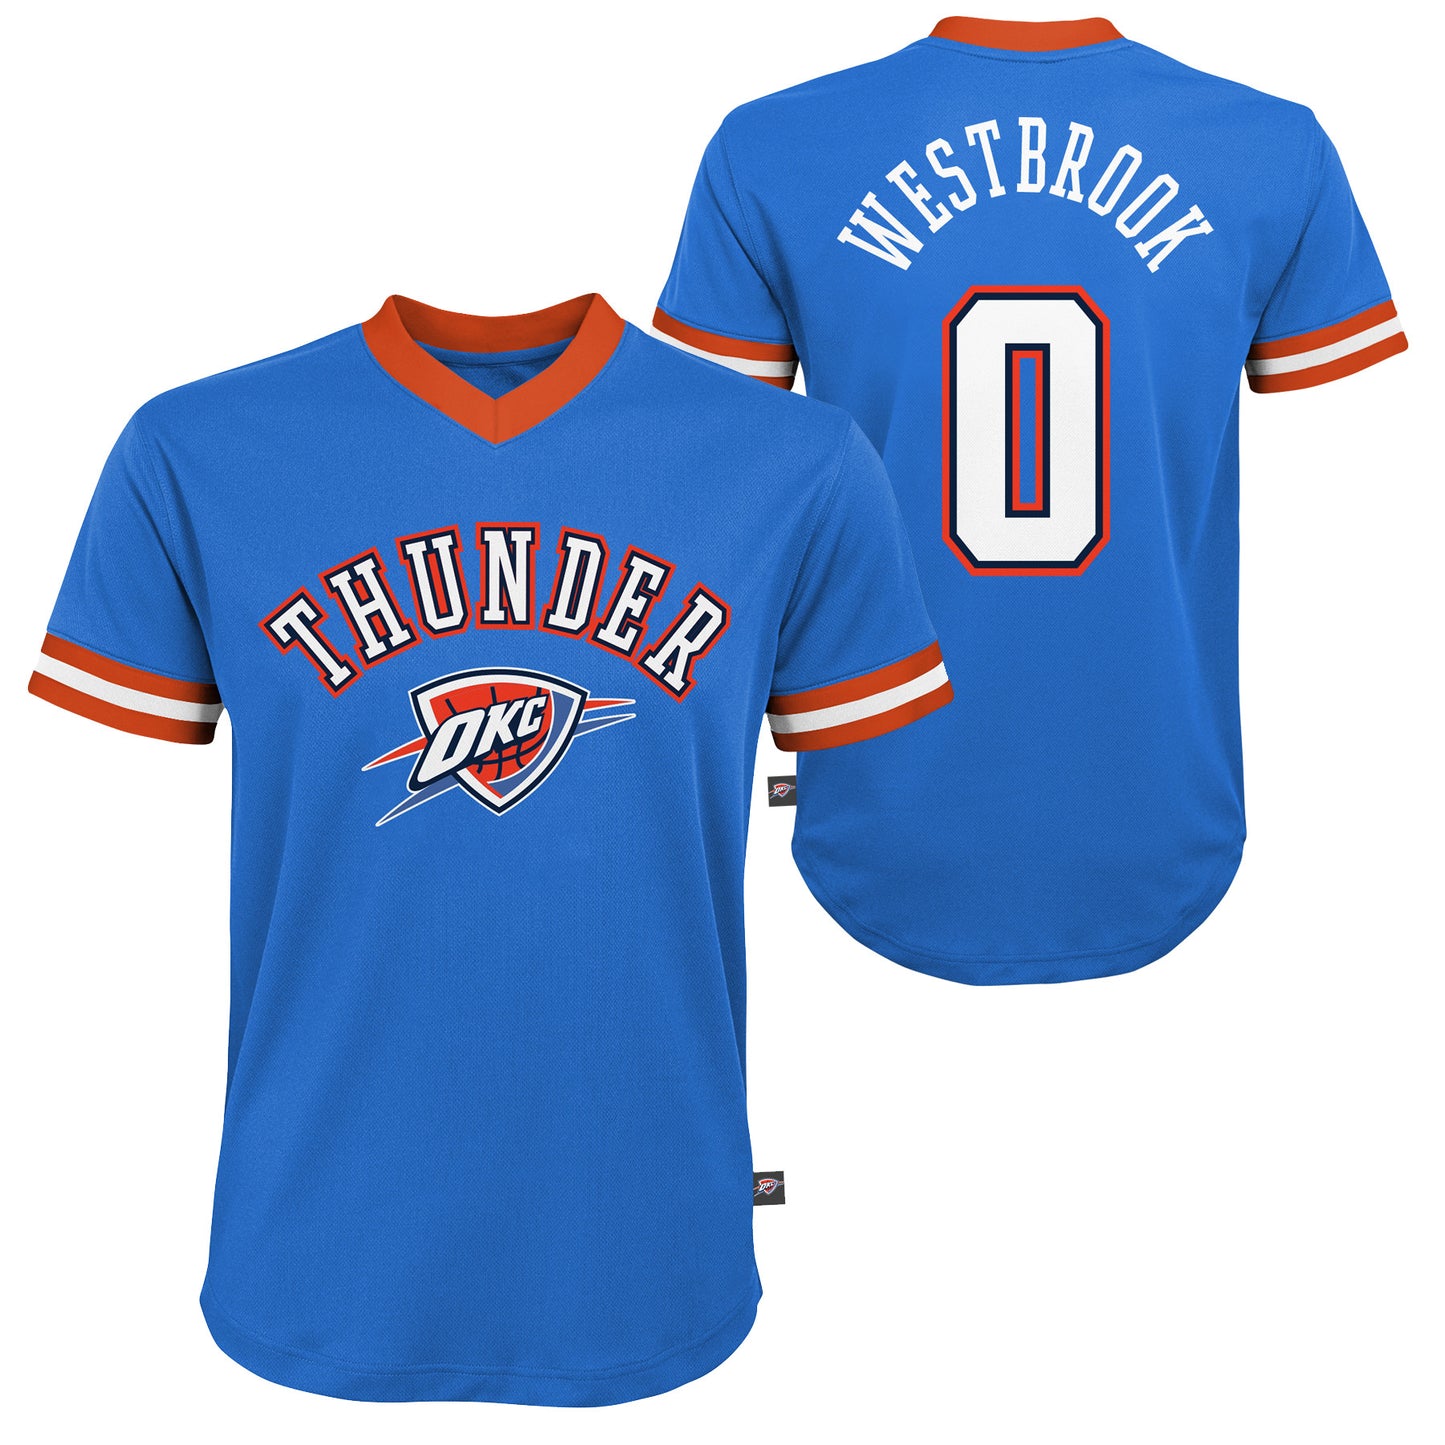 Youth Russell Westbrook Oklahoma City Thunder V-Neck Replica Jersey